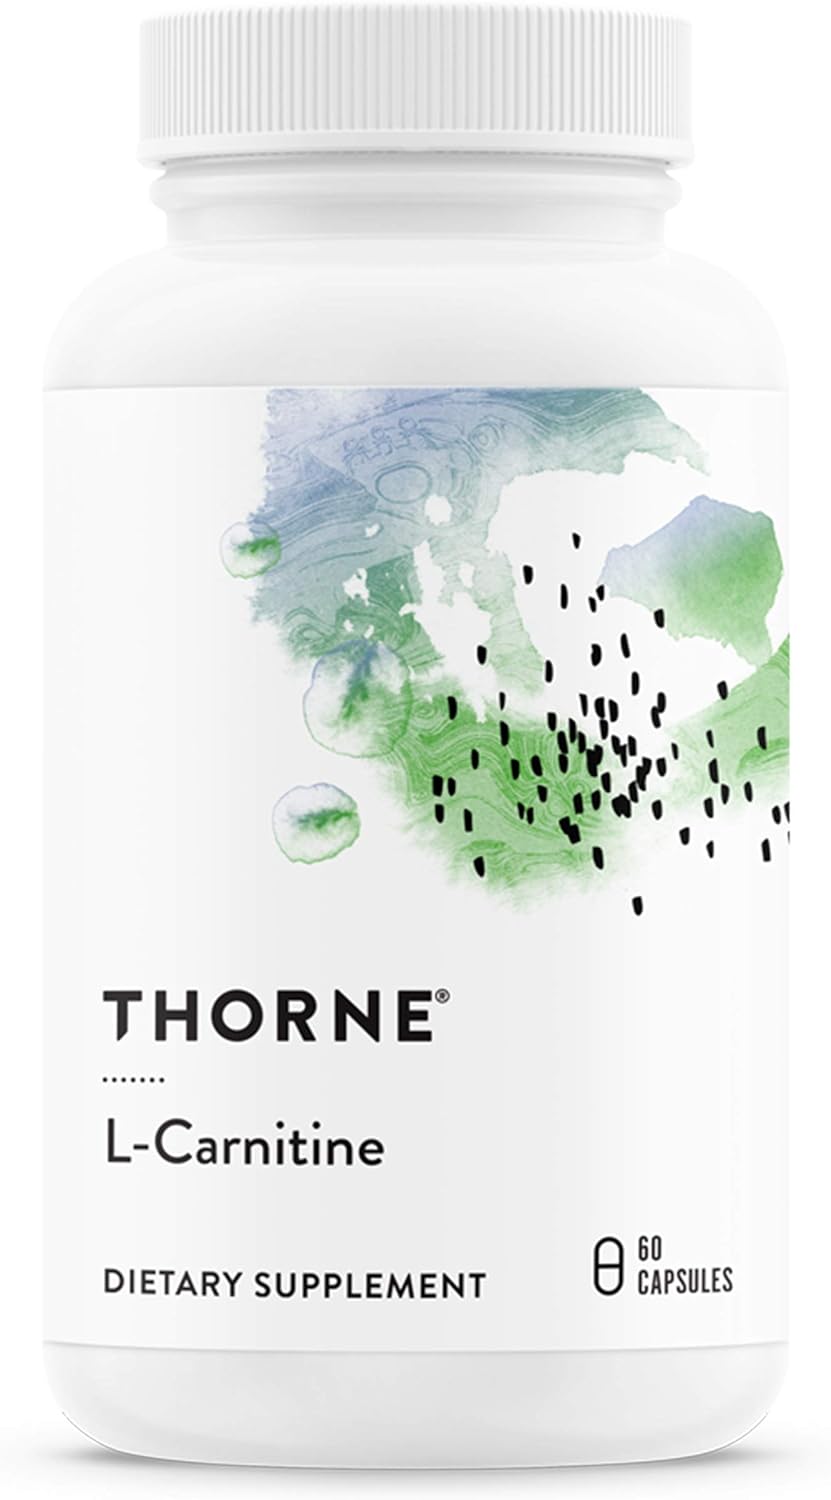 Thorne L-Carnitine - Amino Acid Supplement to Support Energy Productio